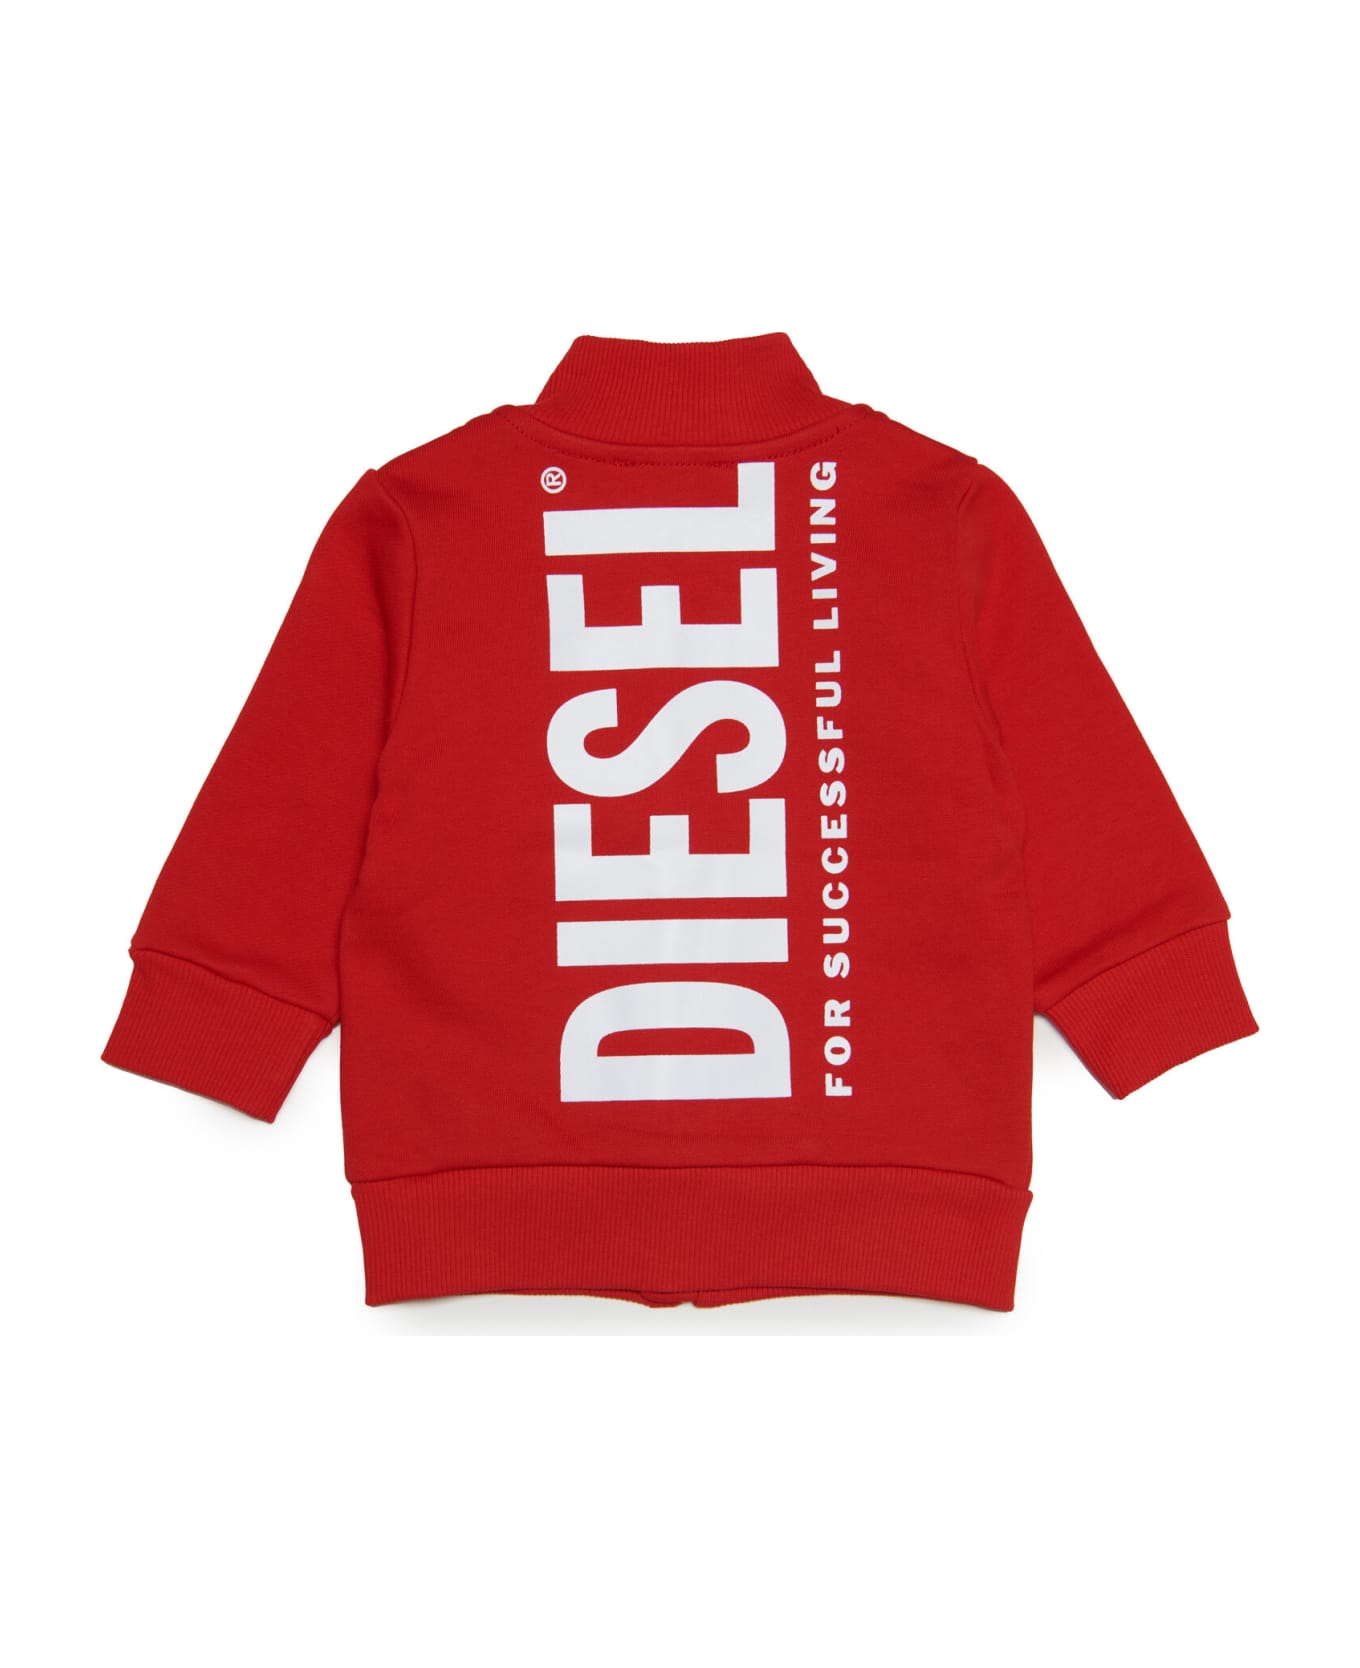 Diesel Solib Sweat-shirt Diesel Red Cotton Sweatshirt With Zip And Extra-large Logo - Carnation red